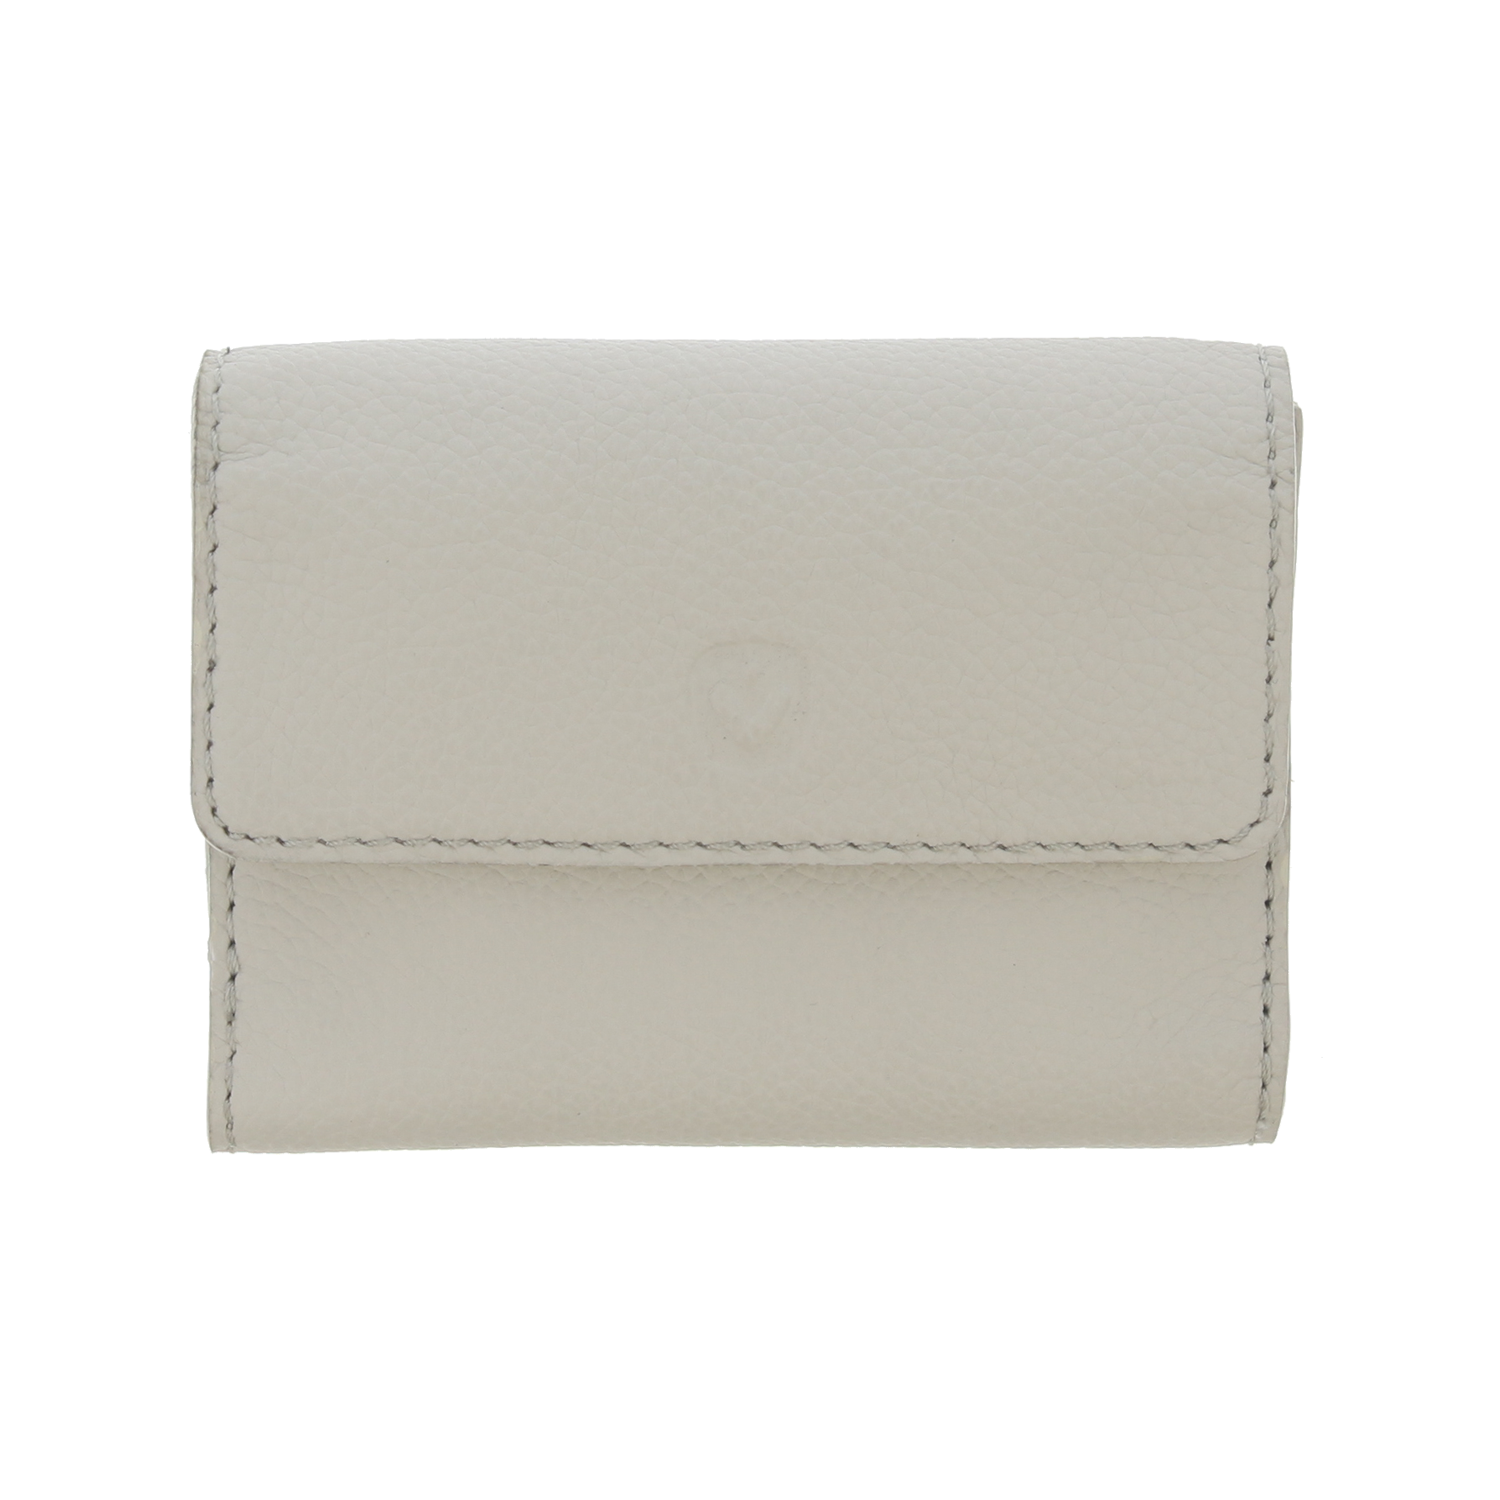 Card Wallet Belt Coin - Creme *Limited Edition*